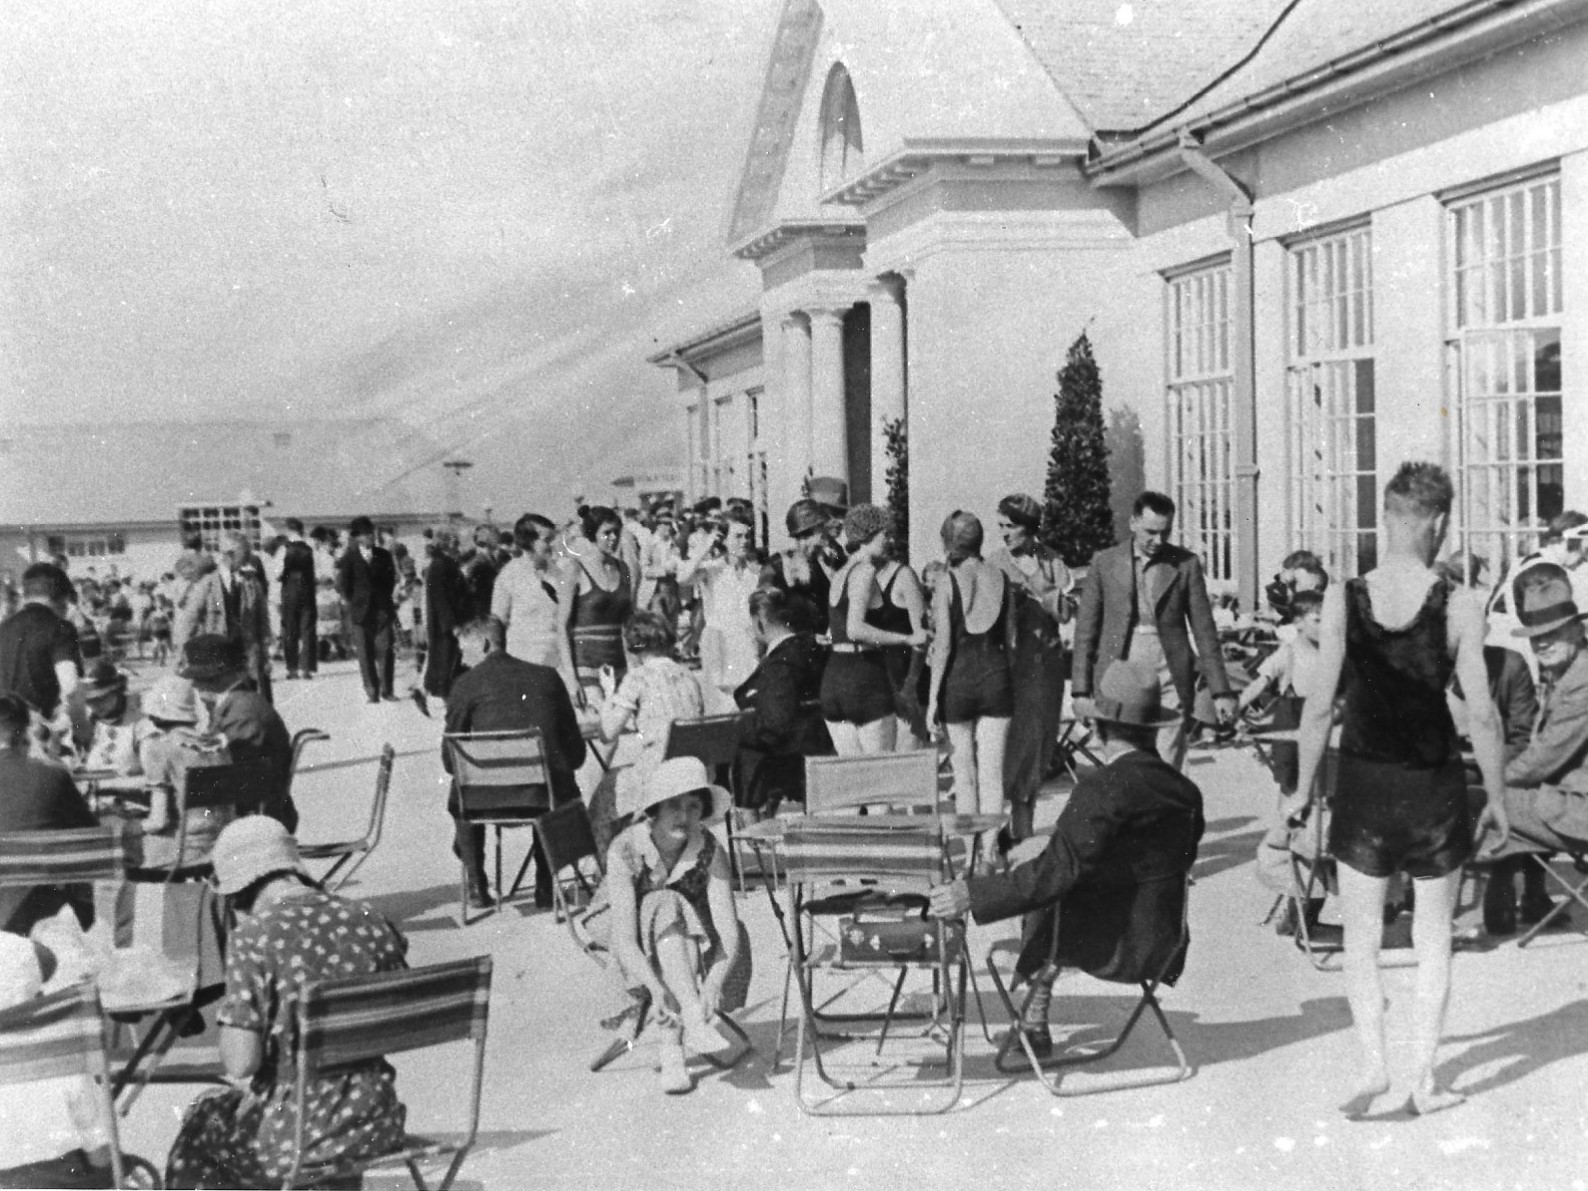 Bathers enjoy a day out at Ainsdale Lido in Southport.